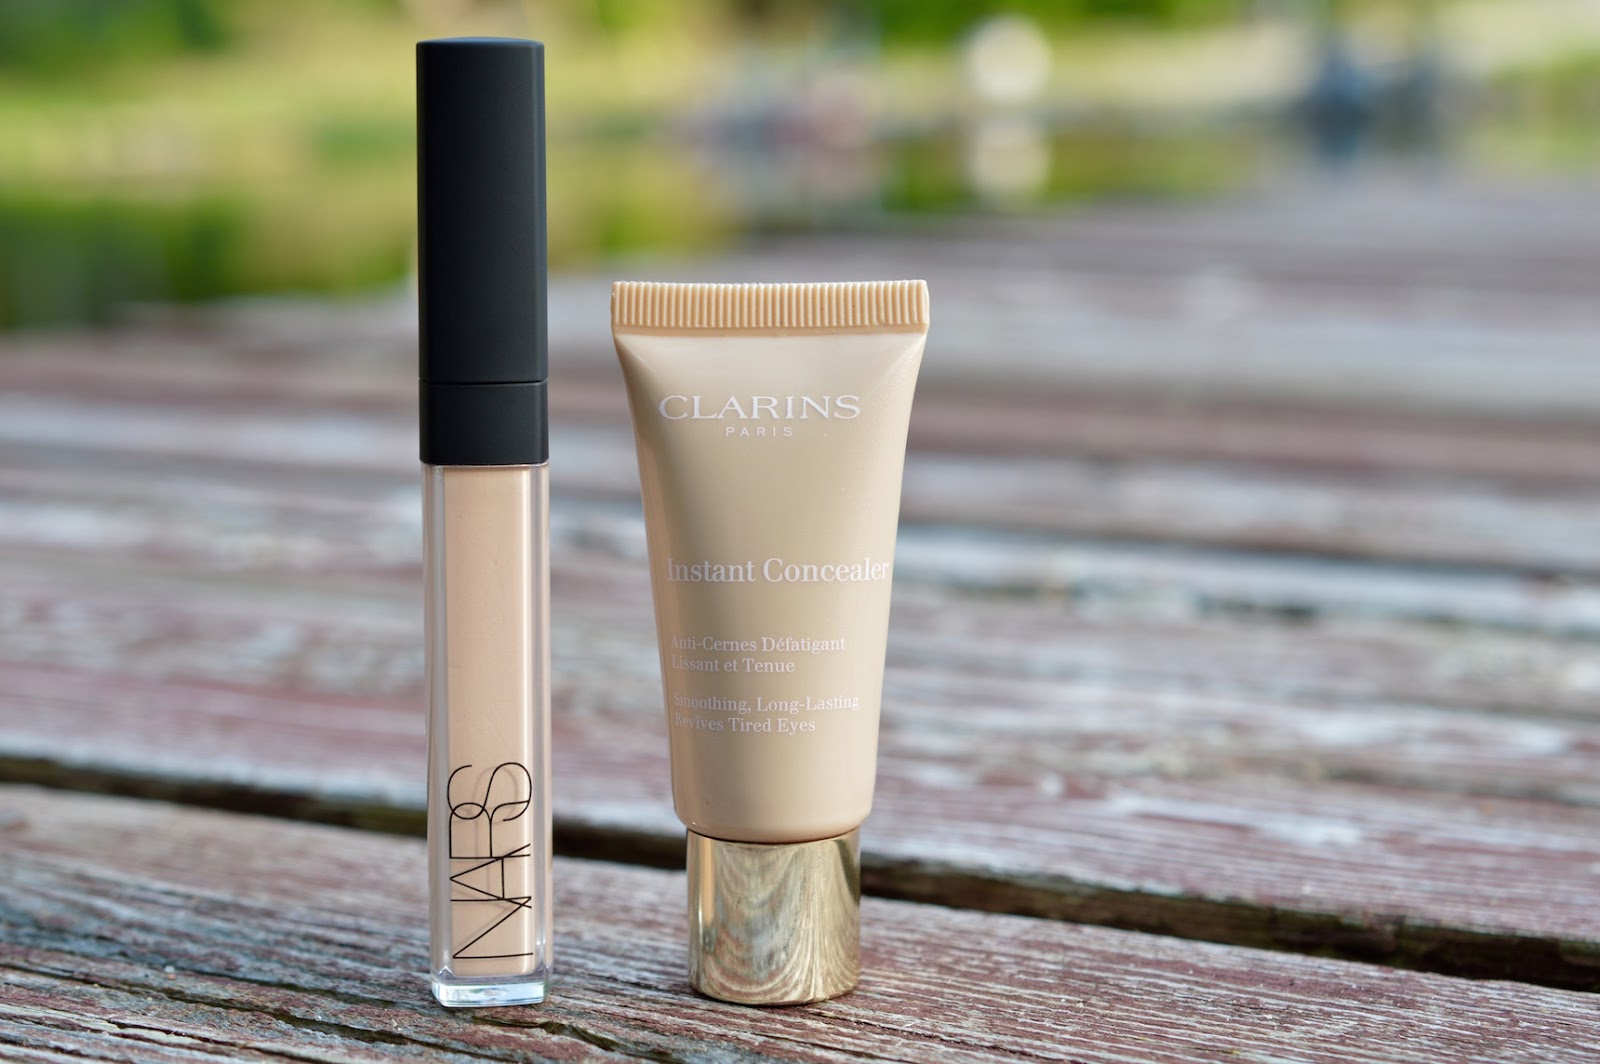 Krydderi Modregning Ruddy The Best High-End Concealer | Clarins Instant vs. Nars Radiant Creamy |  Classically Contemporary